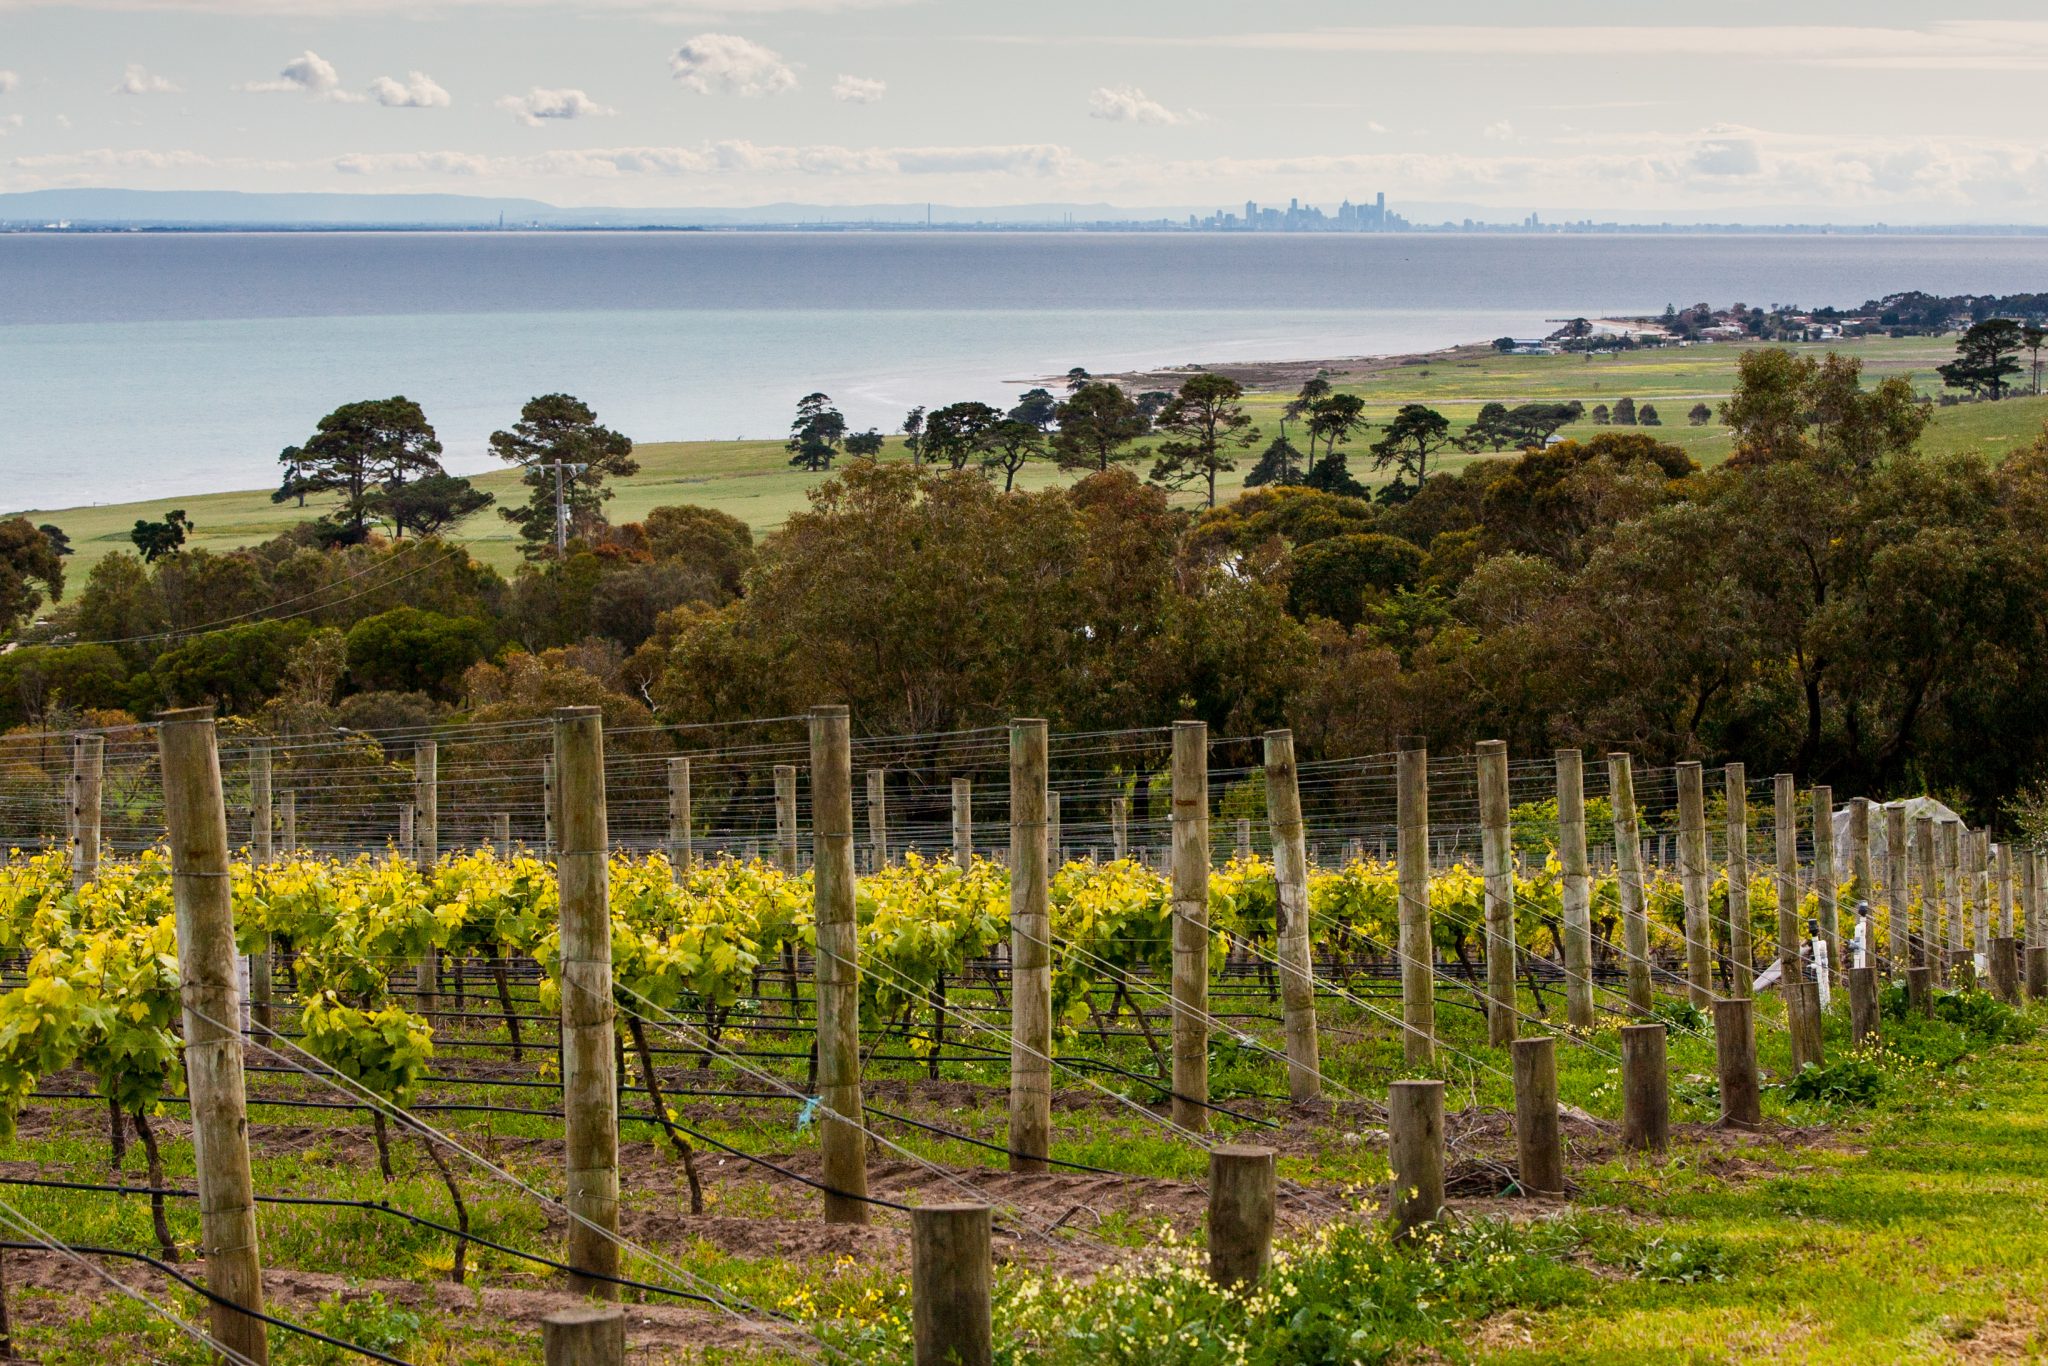 winery tours victoria